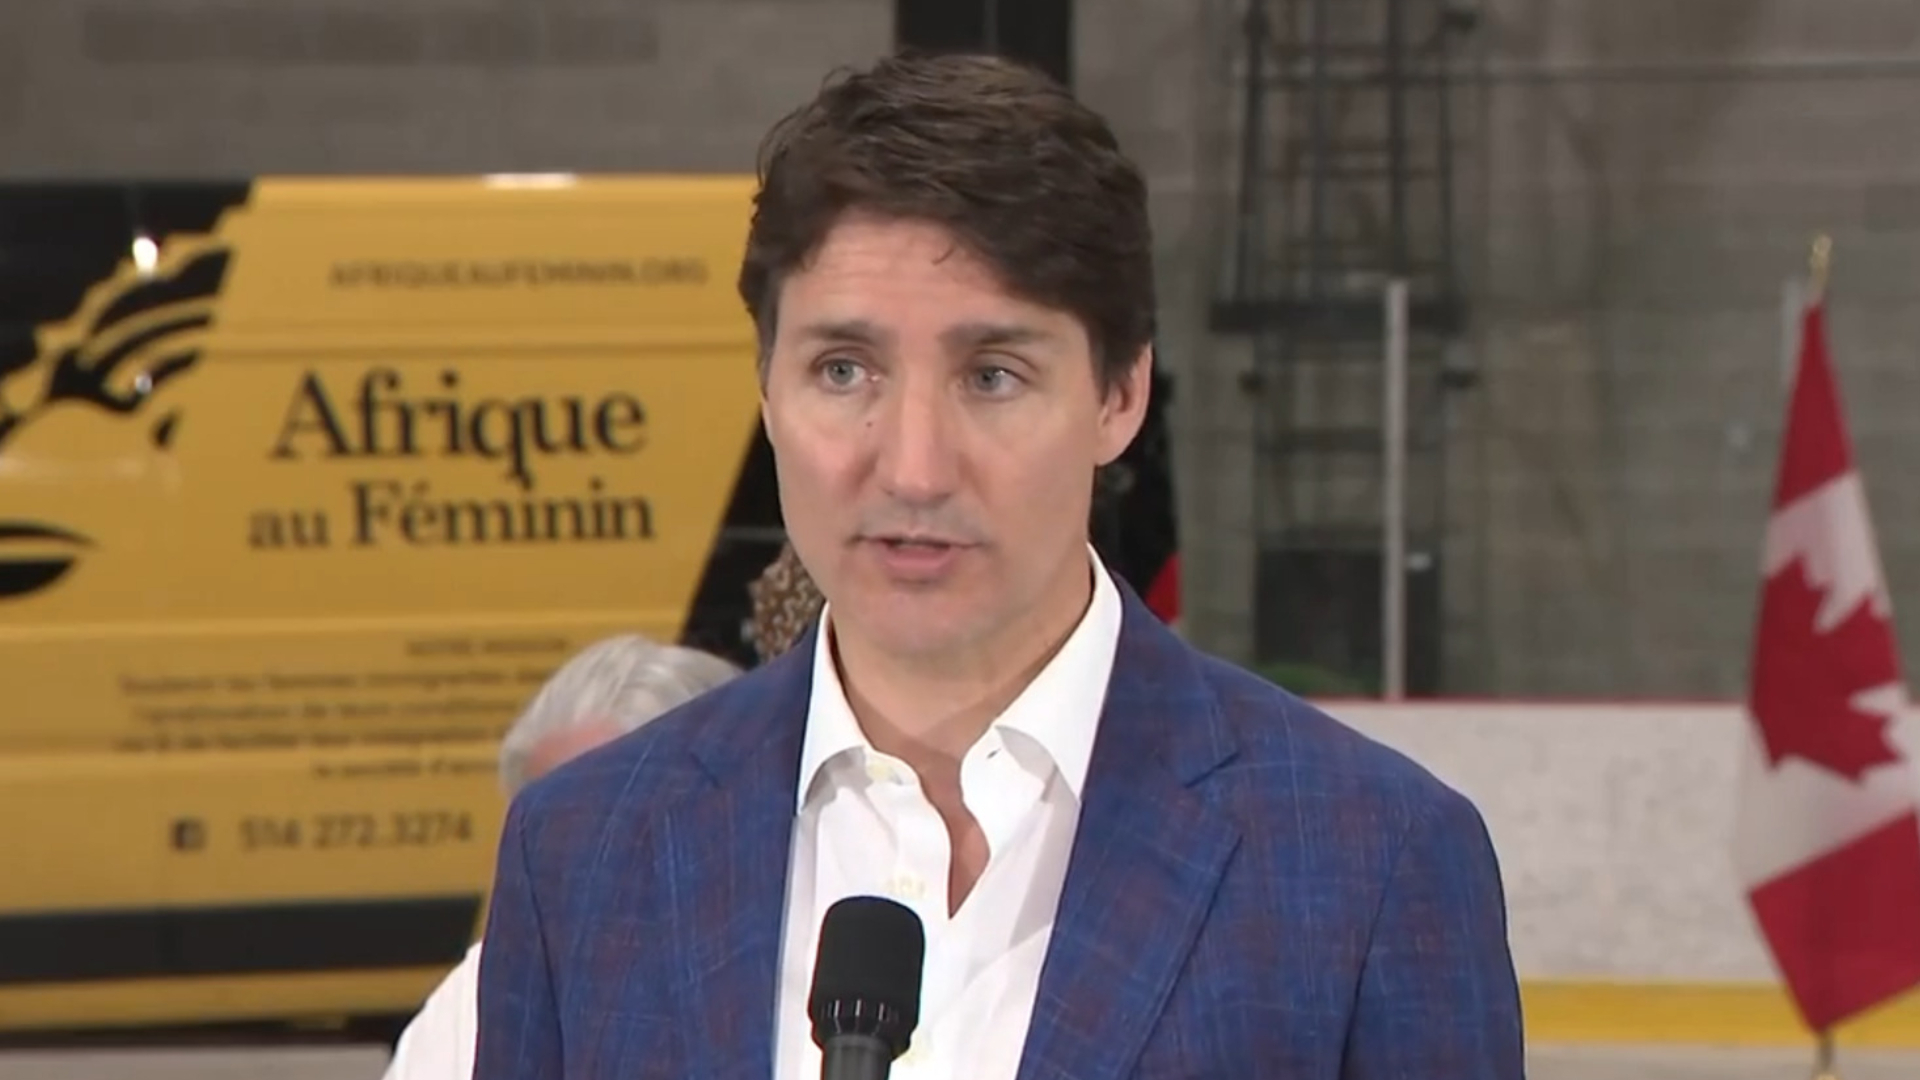 Trudeau faces calls to meet with Liberal caucus over his political future